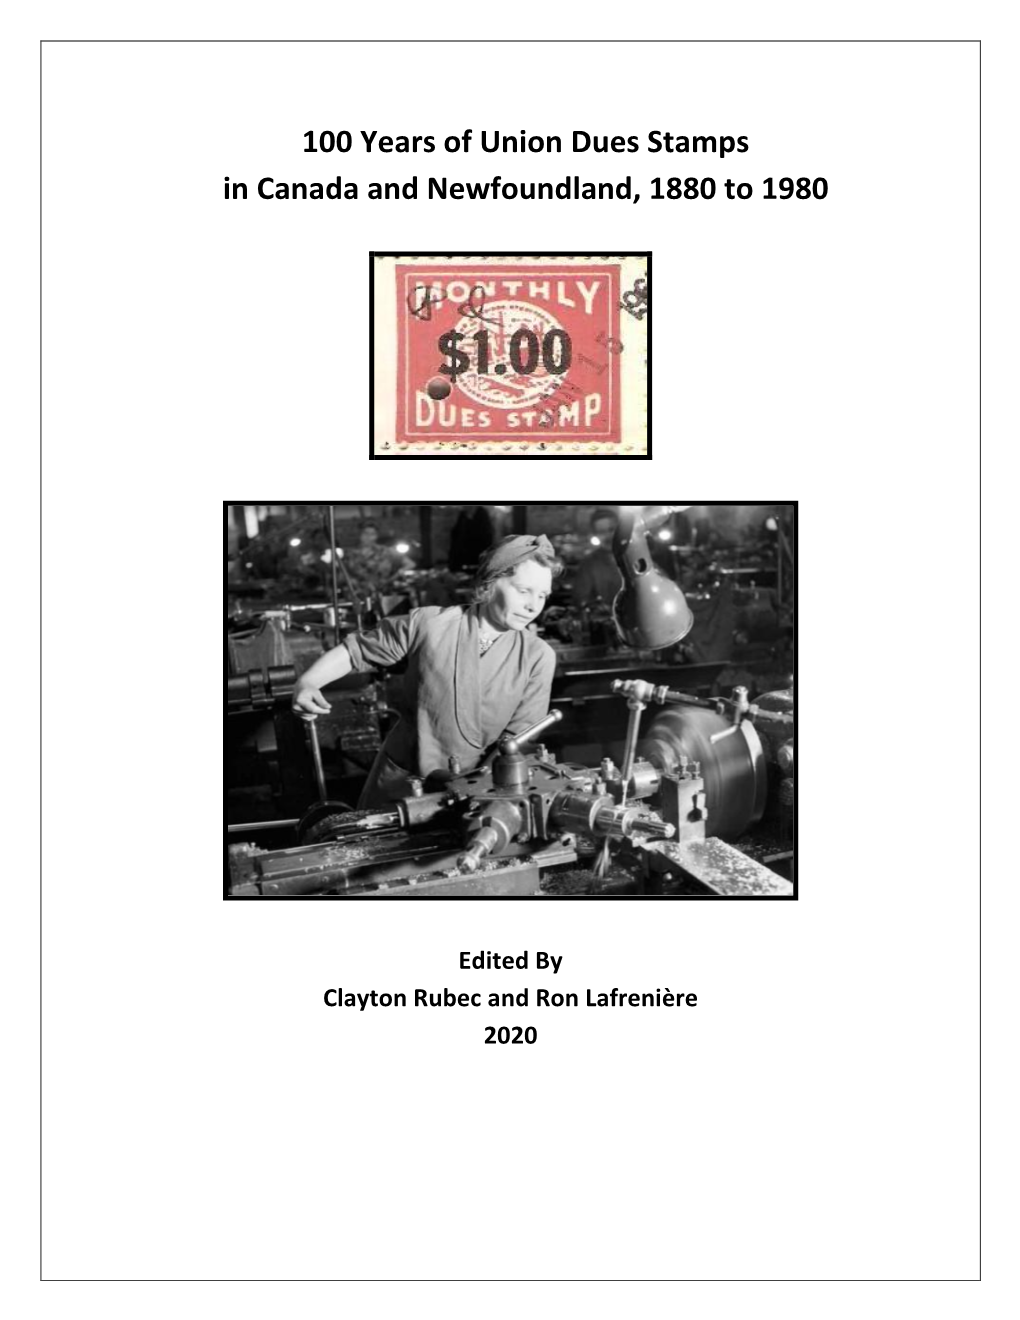 100 Years of Union Dues Stamps in Canada and Newfoundland, 1880 to 1980